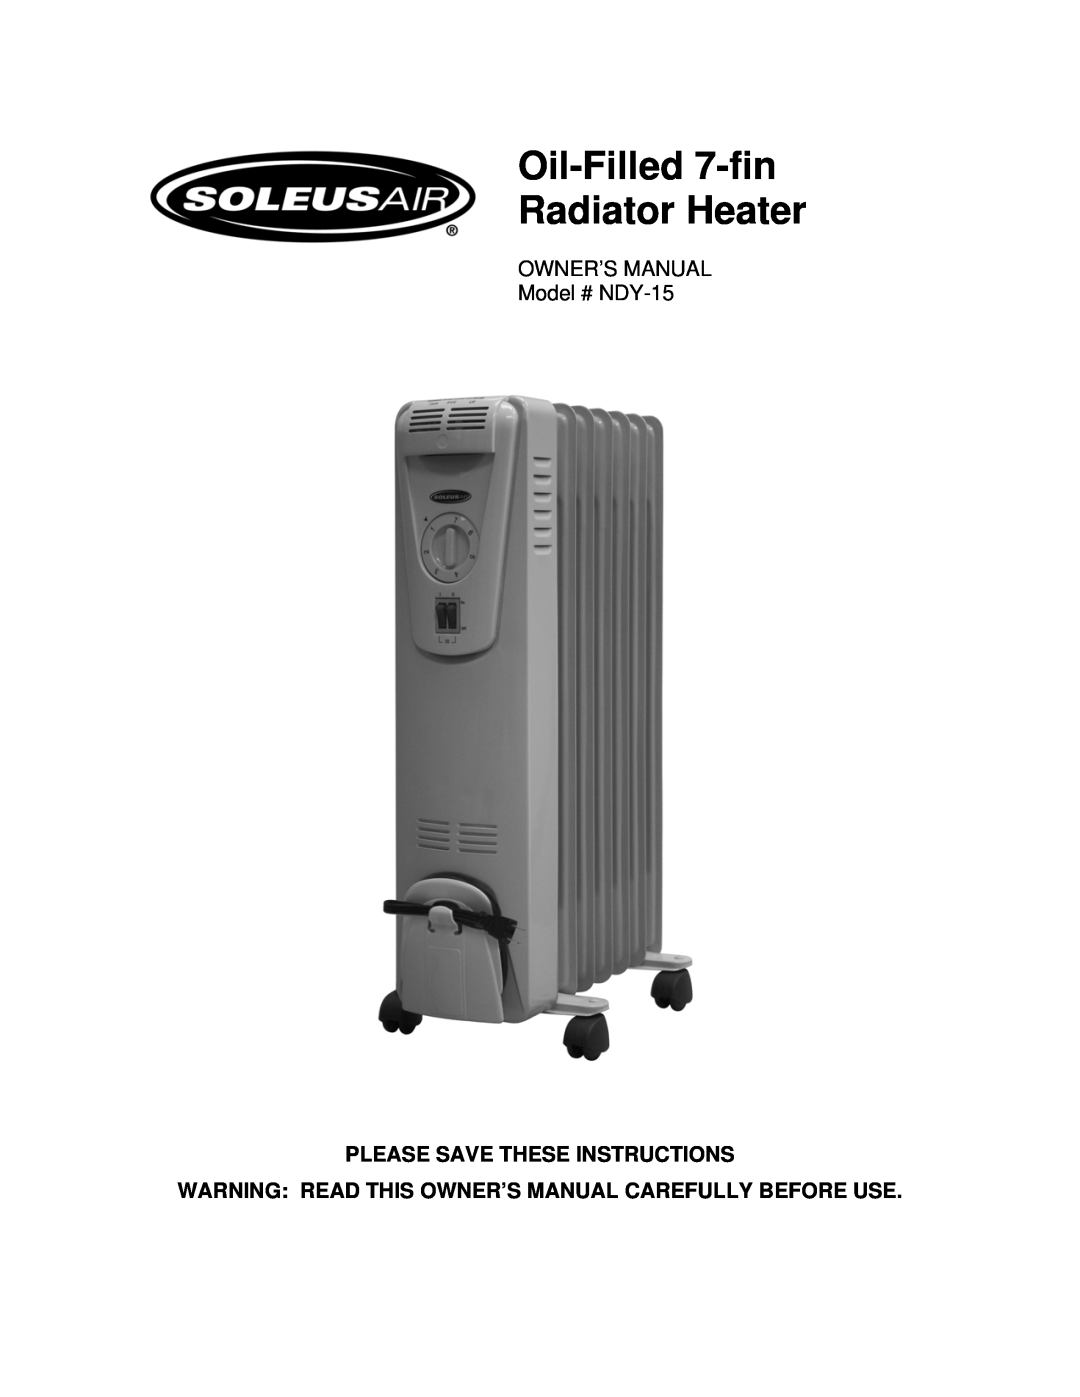 Soleus Air NDY-15 owner manual Oil-Filled 7-fin Radiator Heater, Please Save These Instructions 